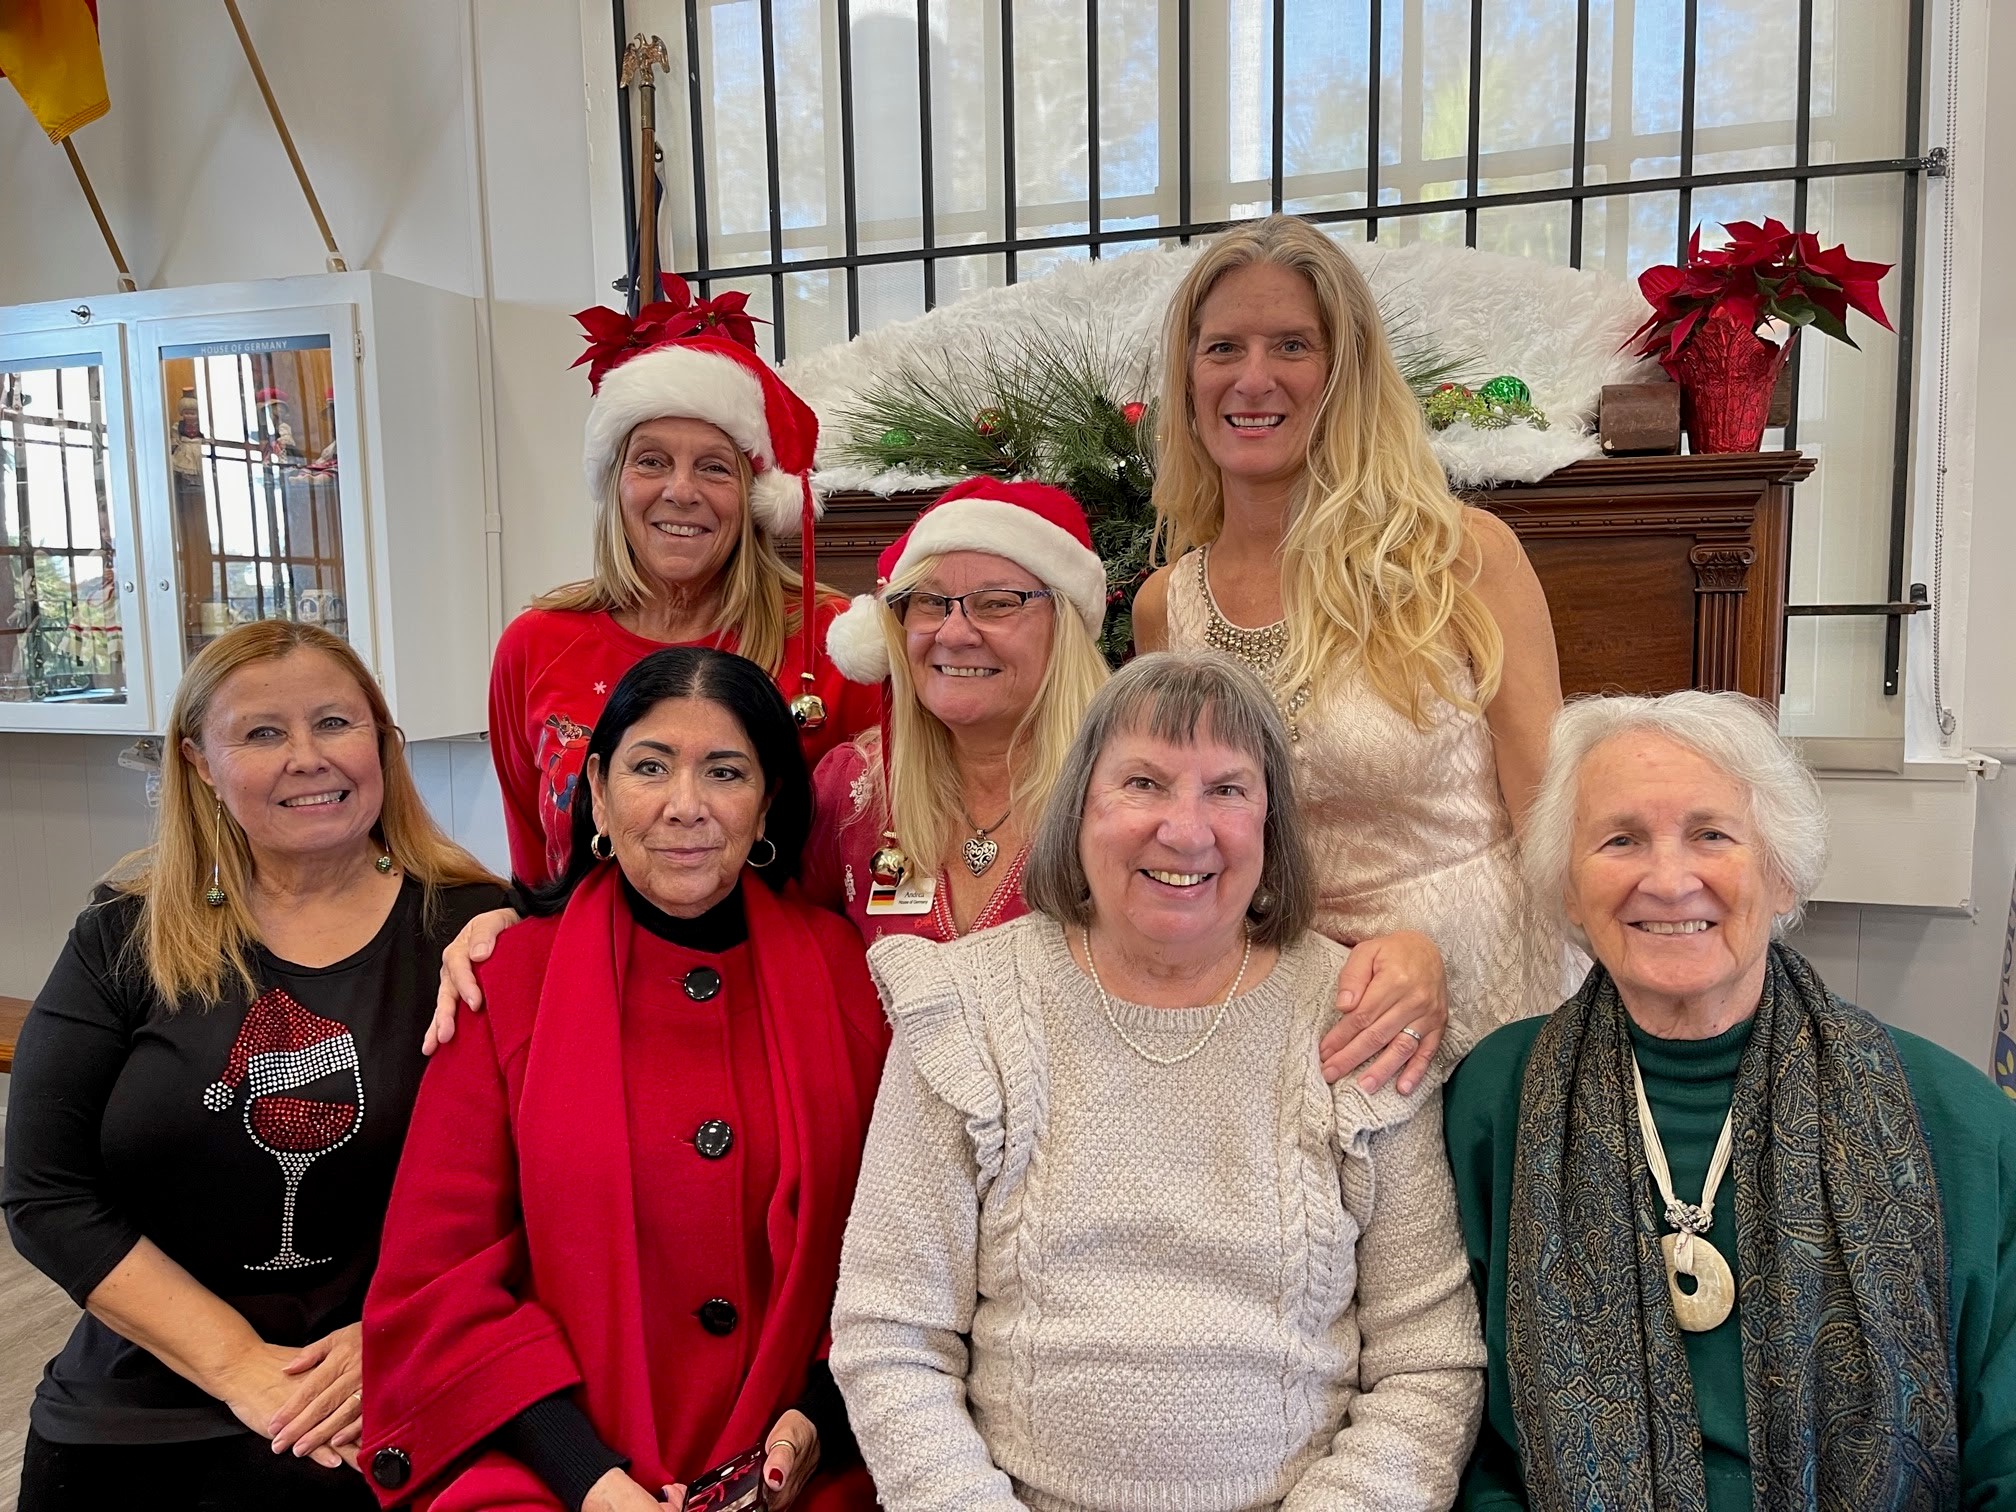 Ladies Auxiliary Luncheon - Hosted by House of Panama